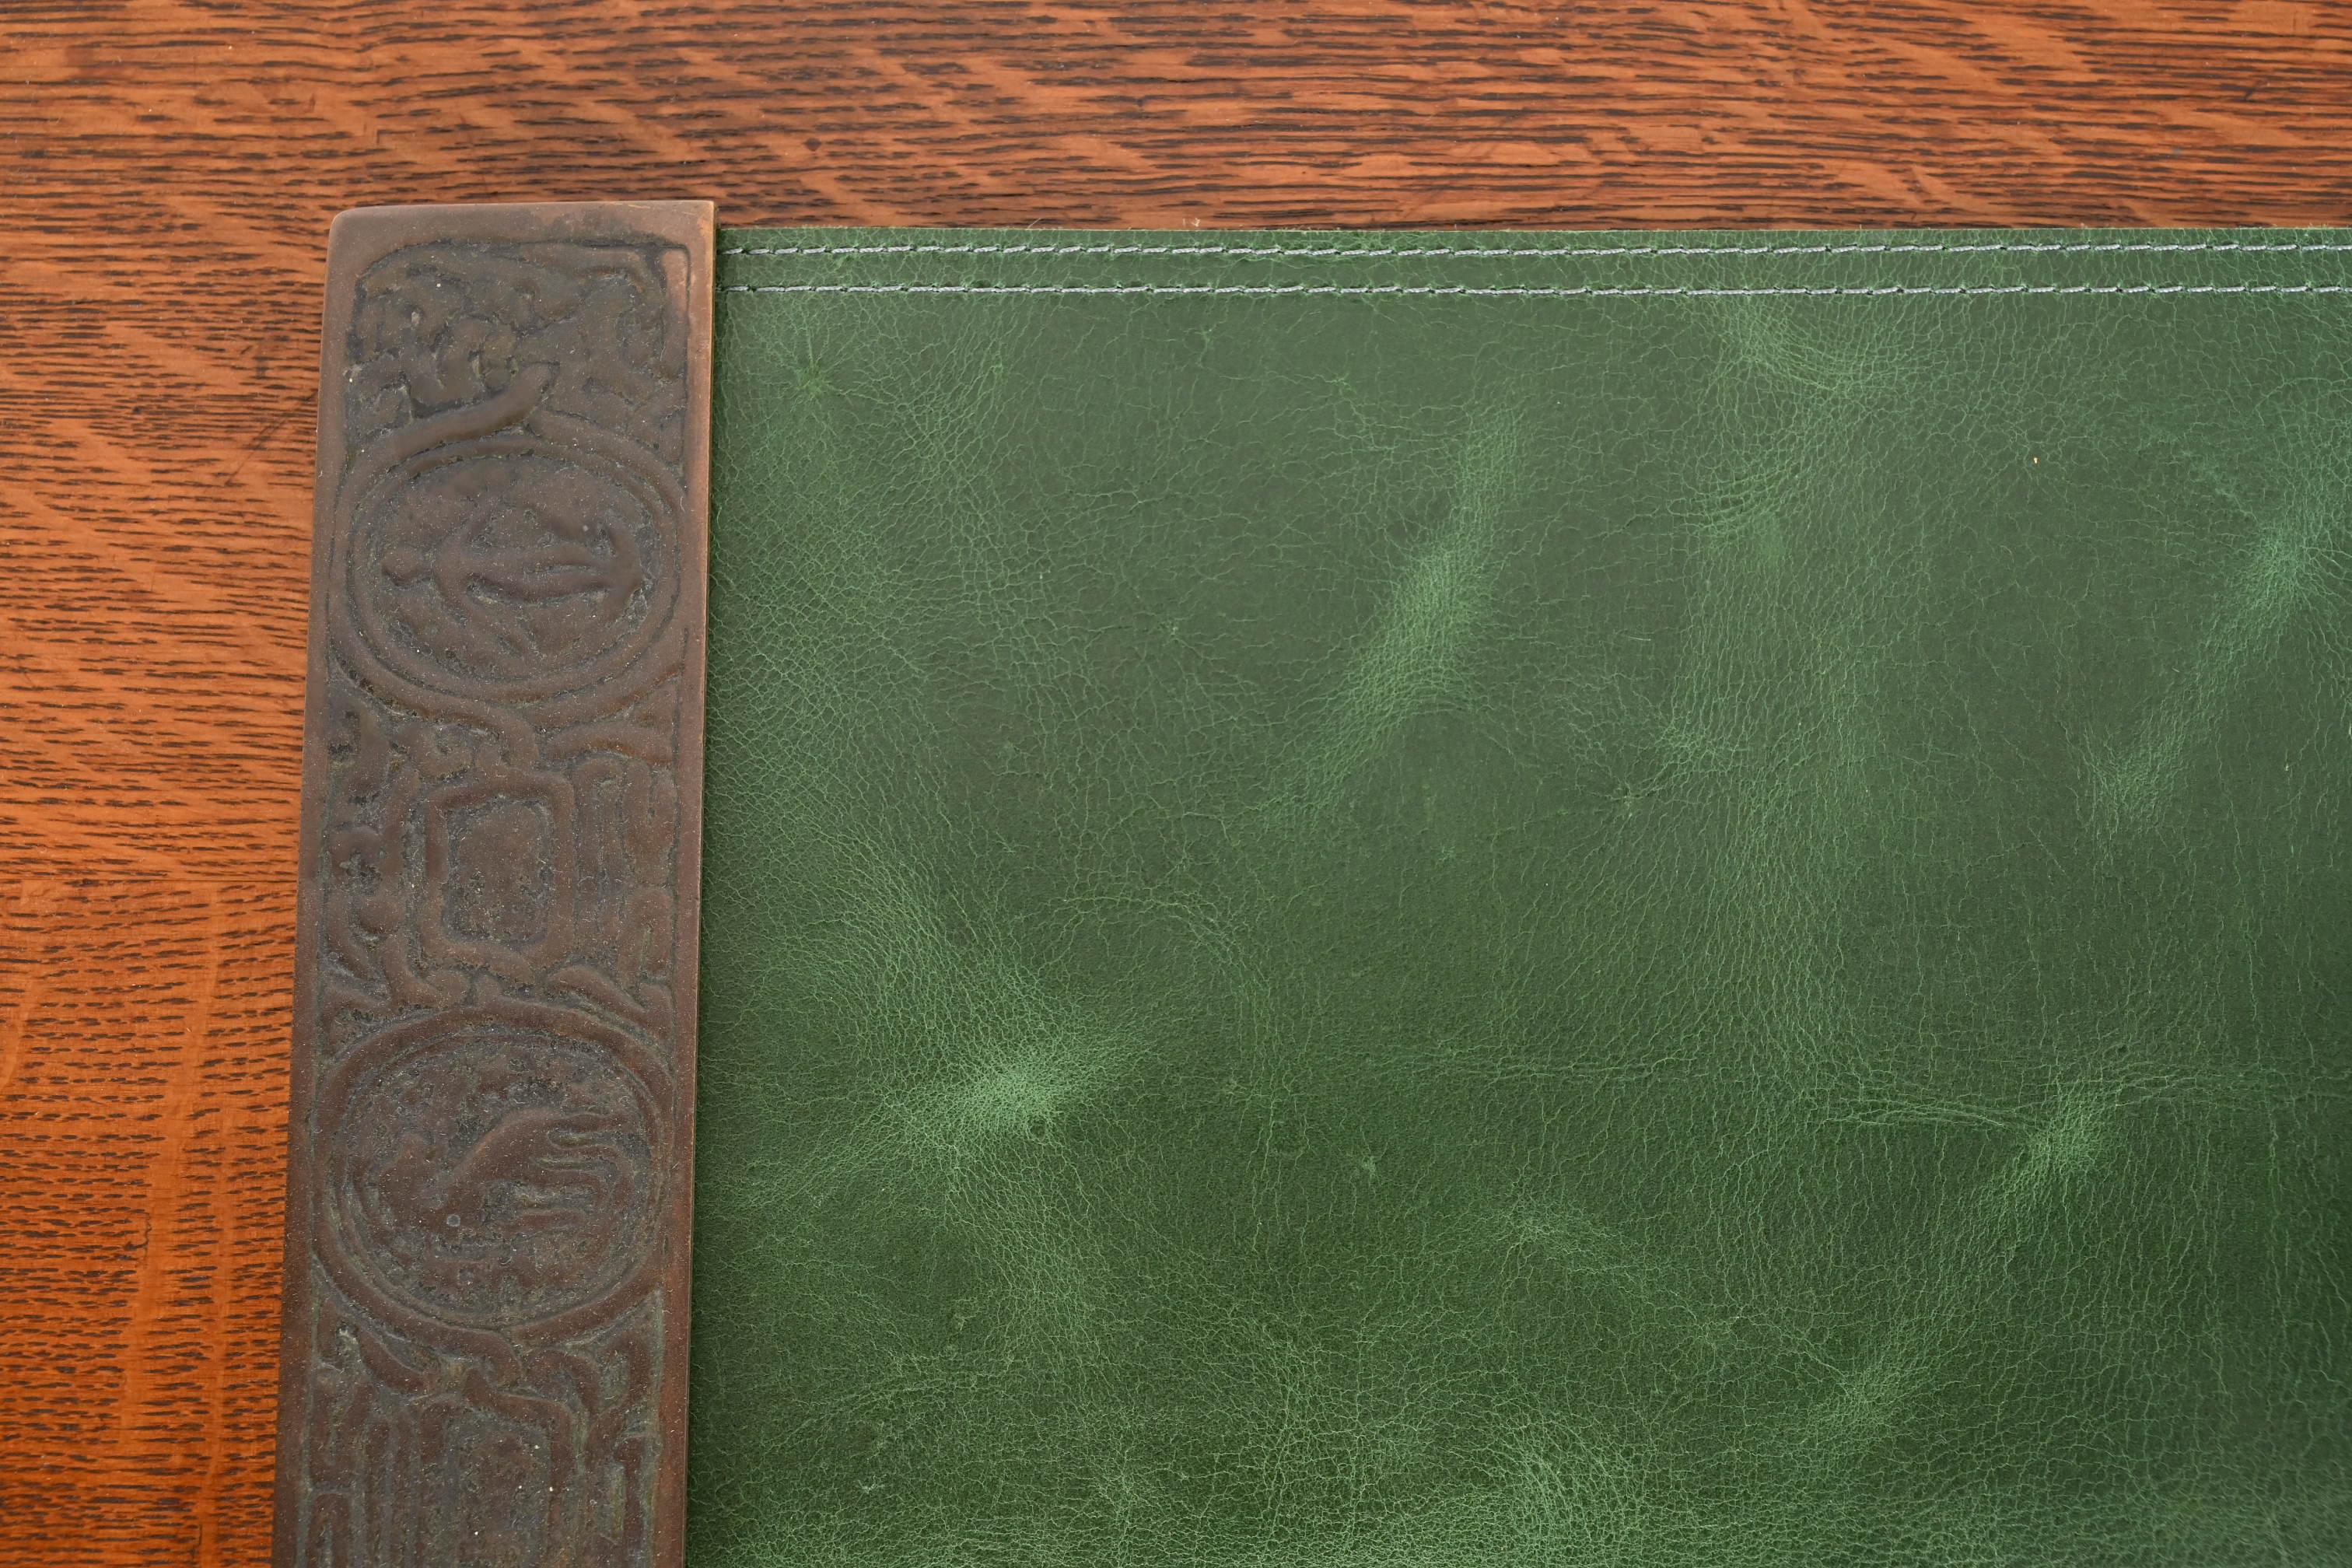 Tiffany Studios New York Zodiac Bronze Blotter Ends With Green Leather Desk Pad For Sale 4